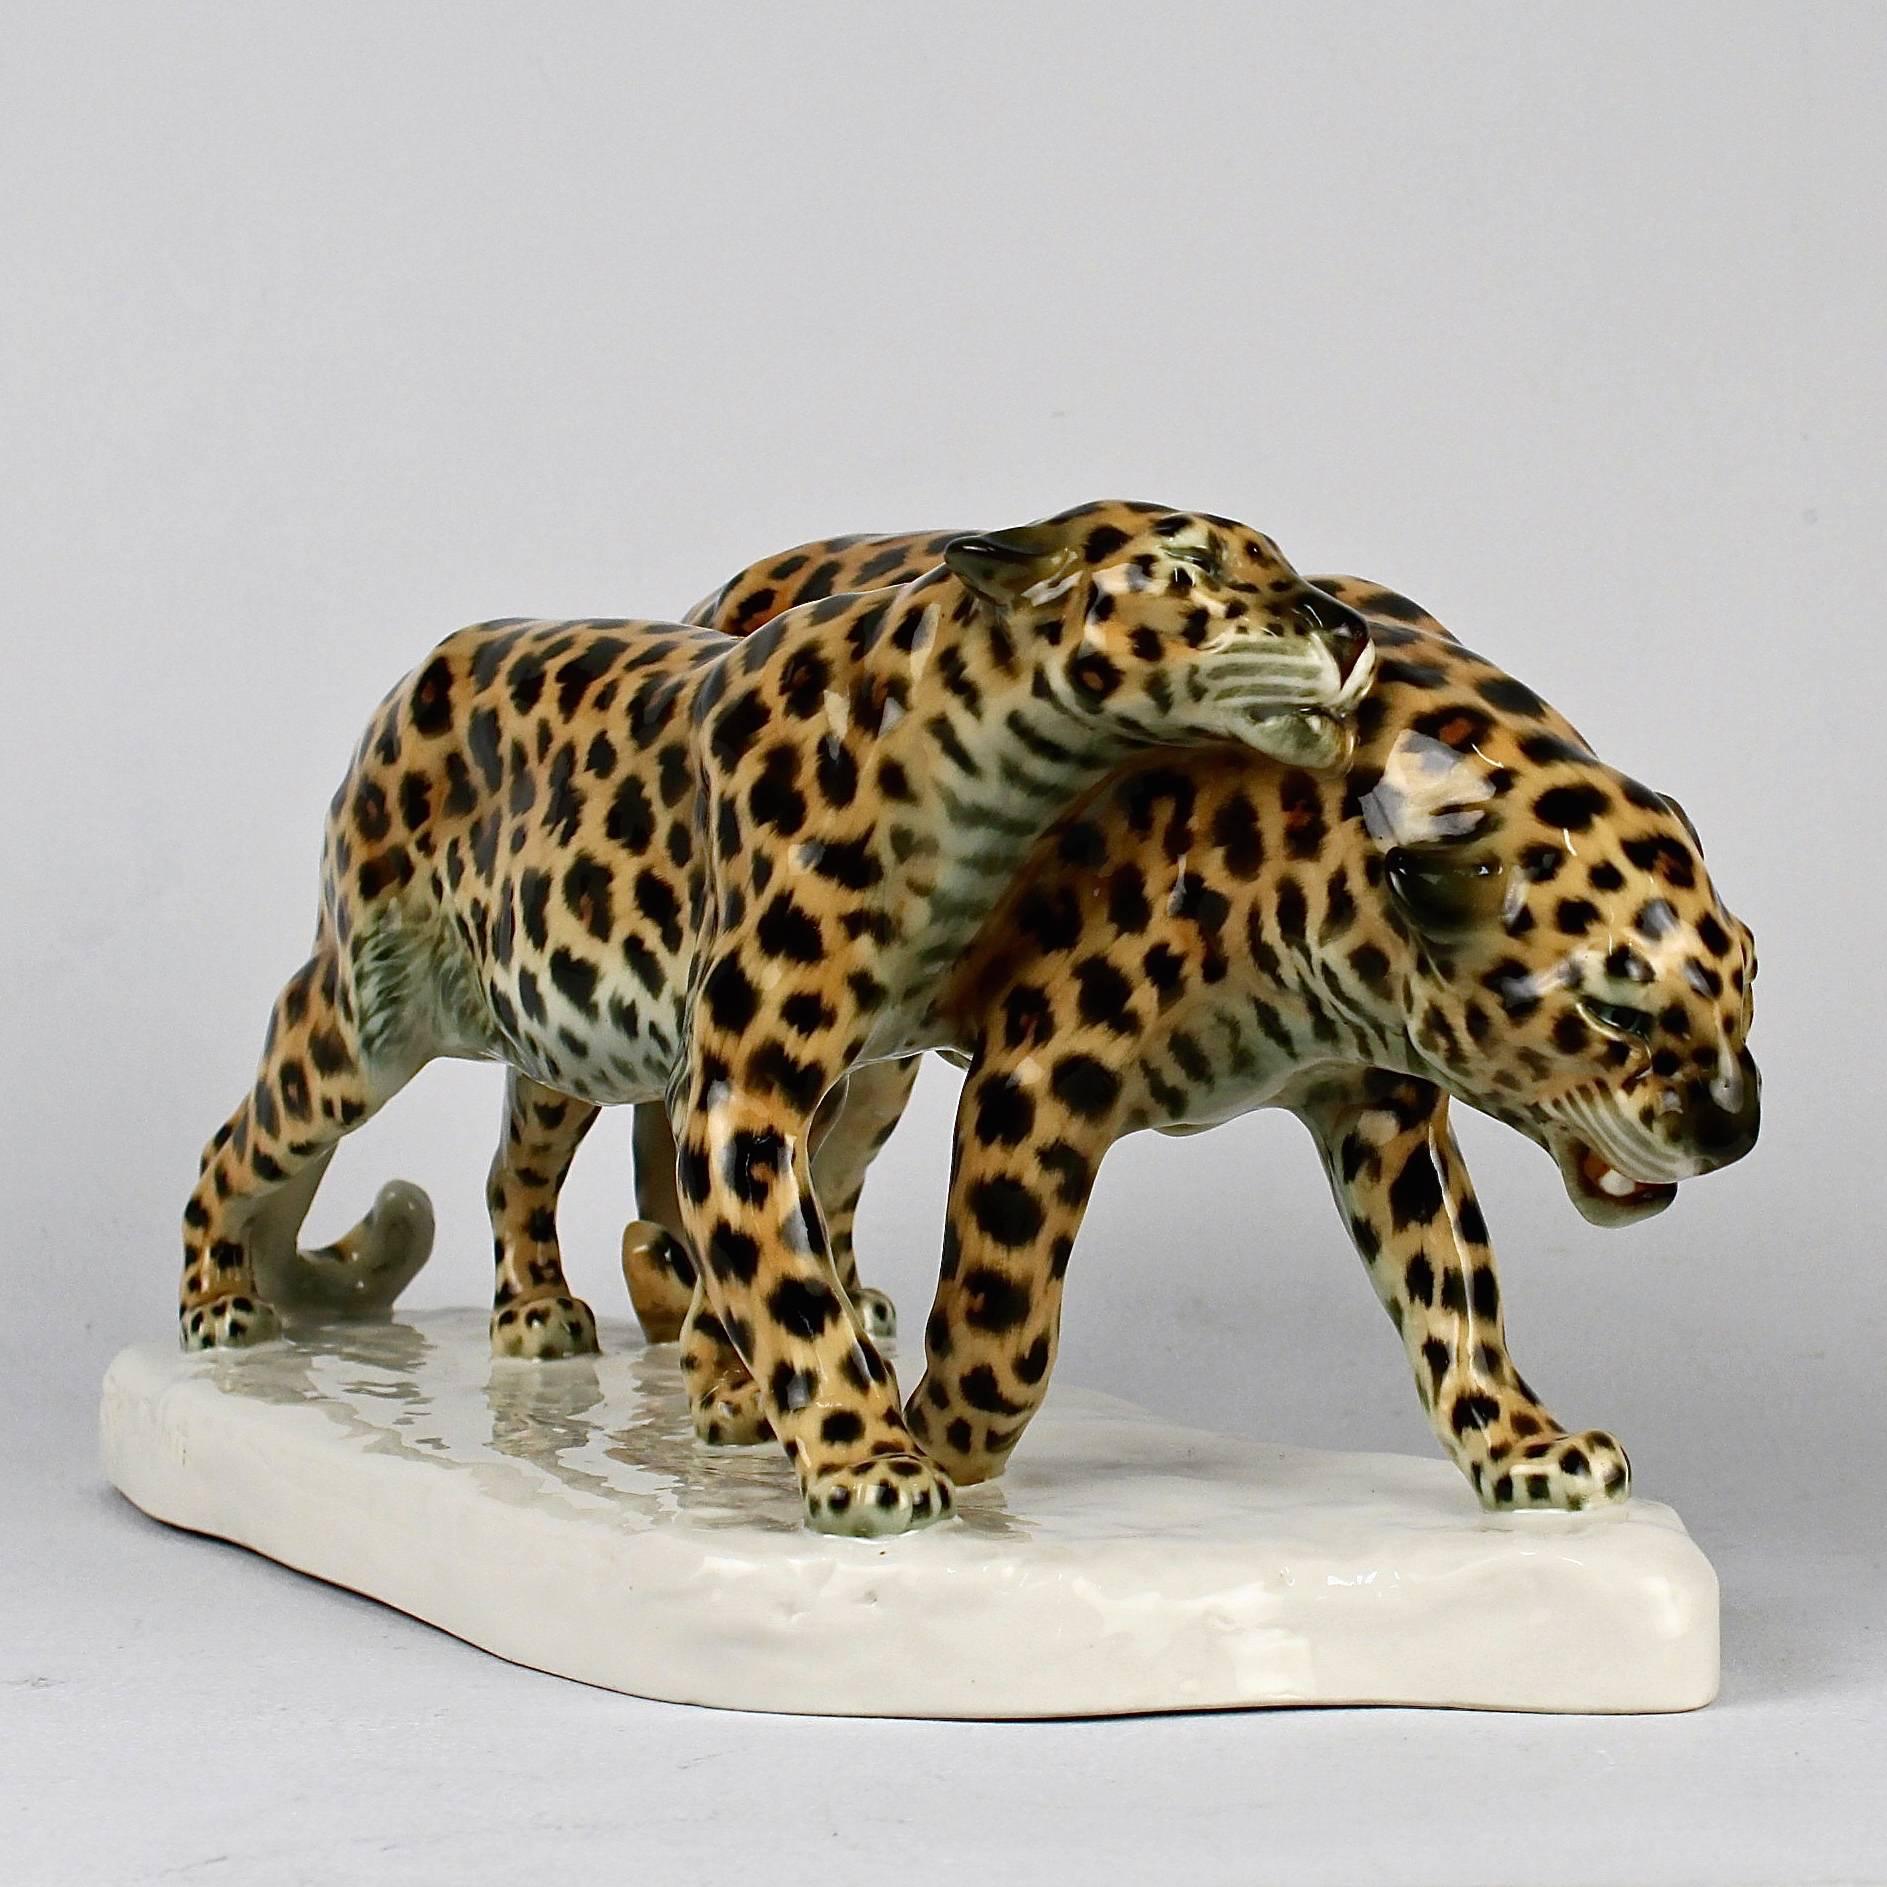 A large porcelain figurine of two leopards modeled by Etha Richter for the Schwarzburger Werkstätten für Porzellankunst with strong design elements that hint at the Art Deco movement. 

The figure was produced in 1914 and bears the factory stamp